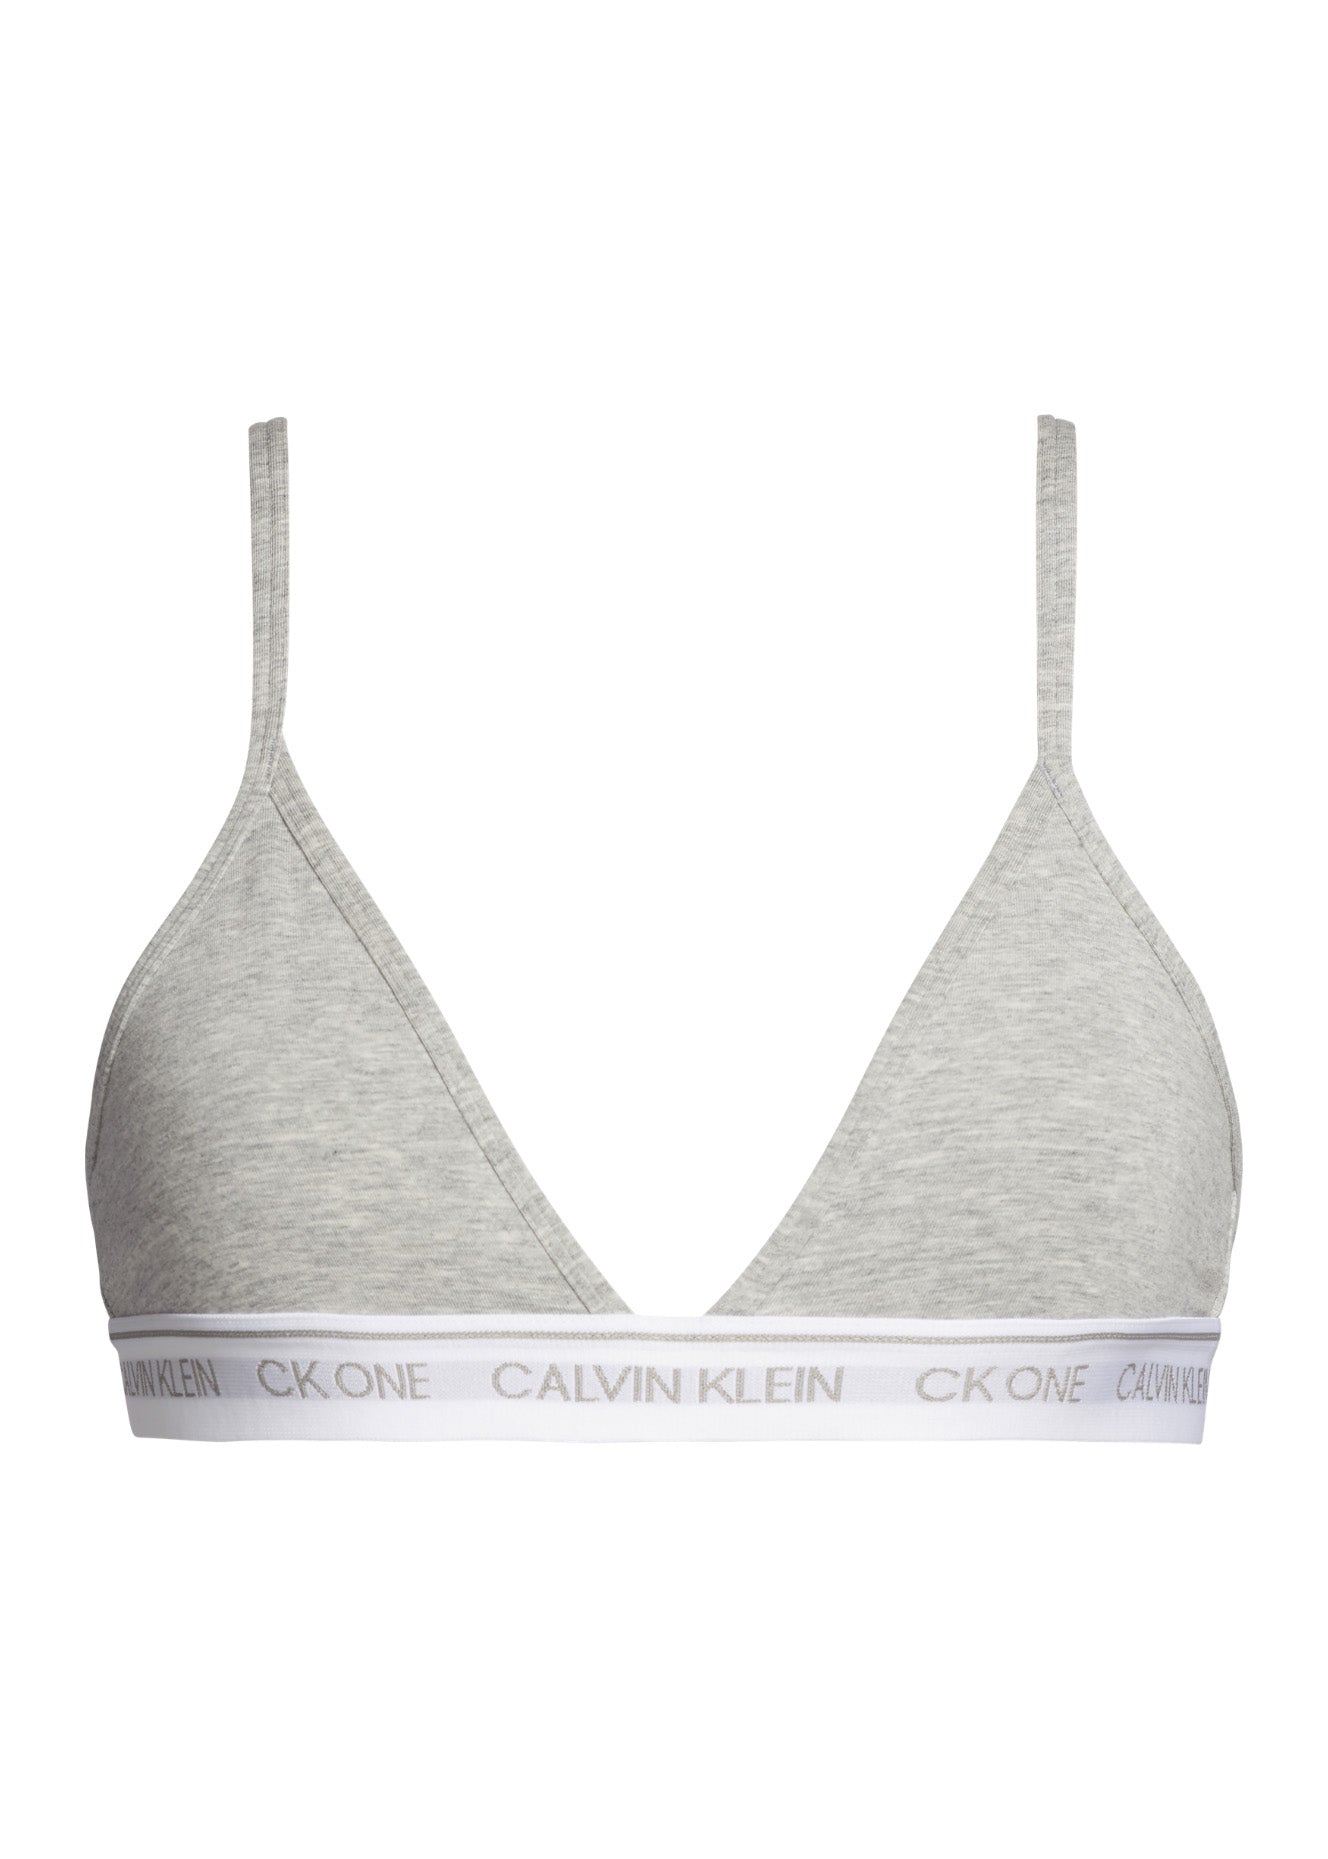 Calvin Klein CK ONE Unlined Triangle Bra - Grey Heather – Potters of Buxton